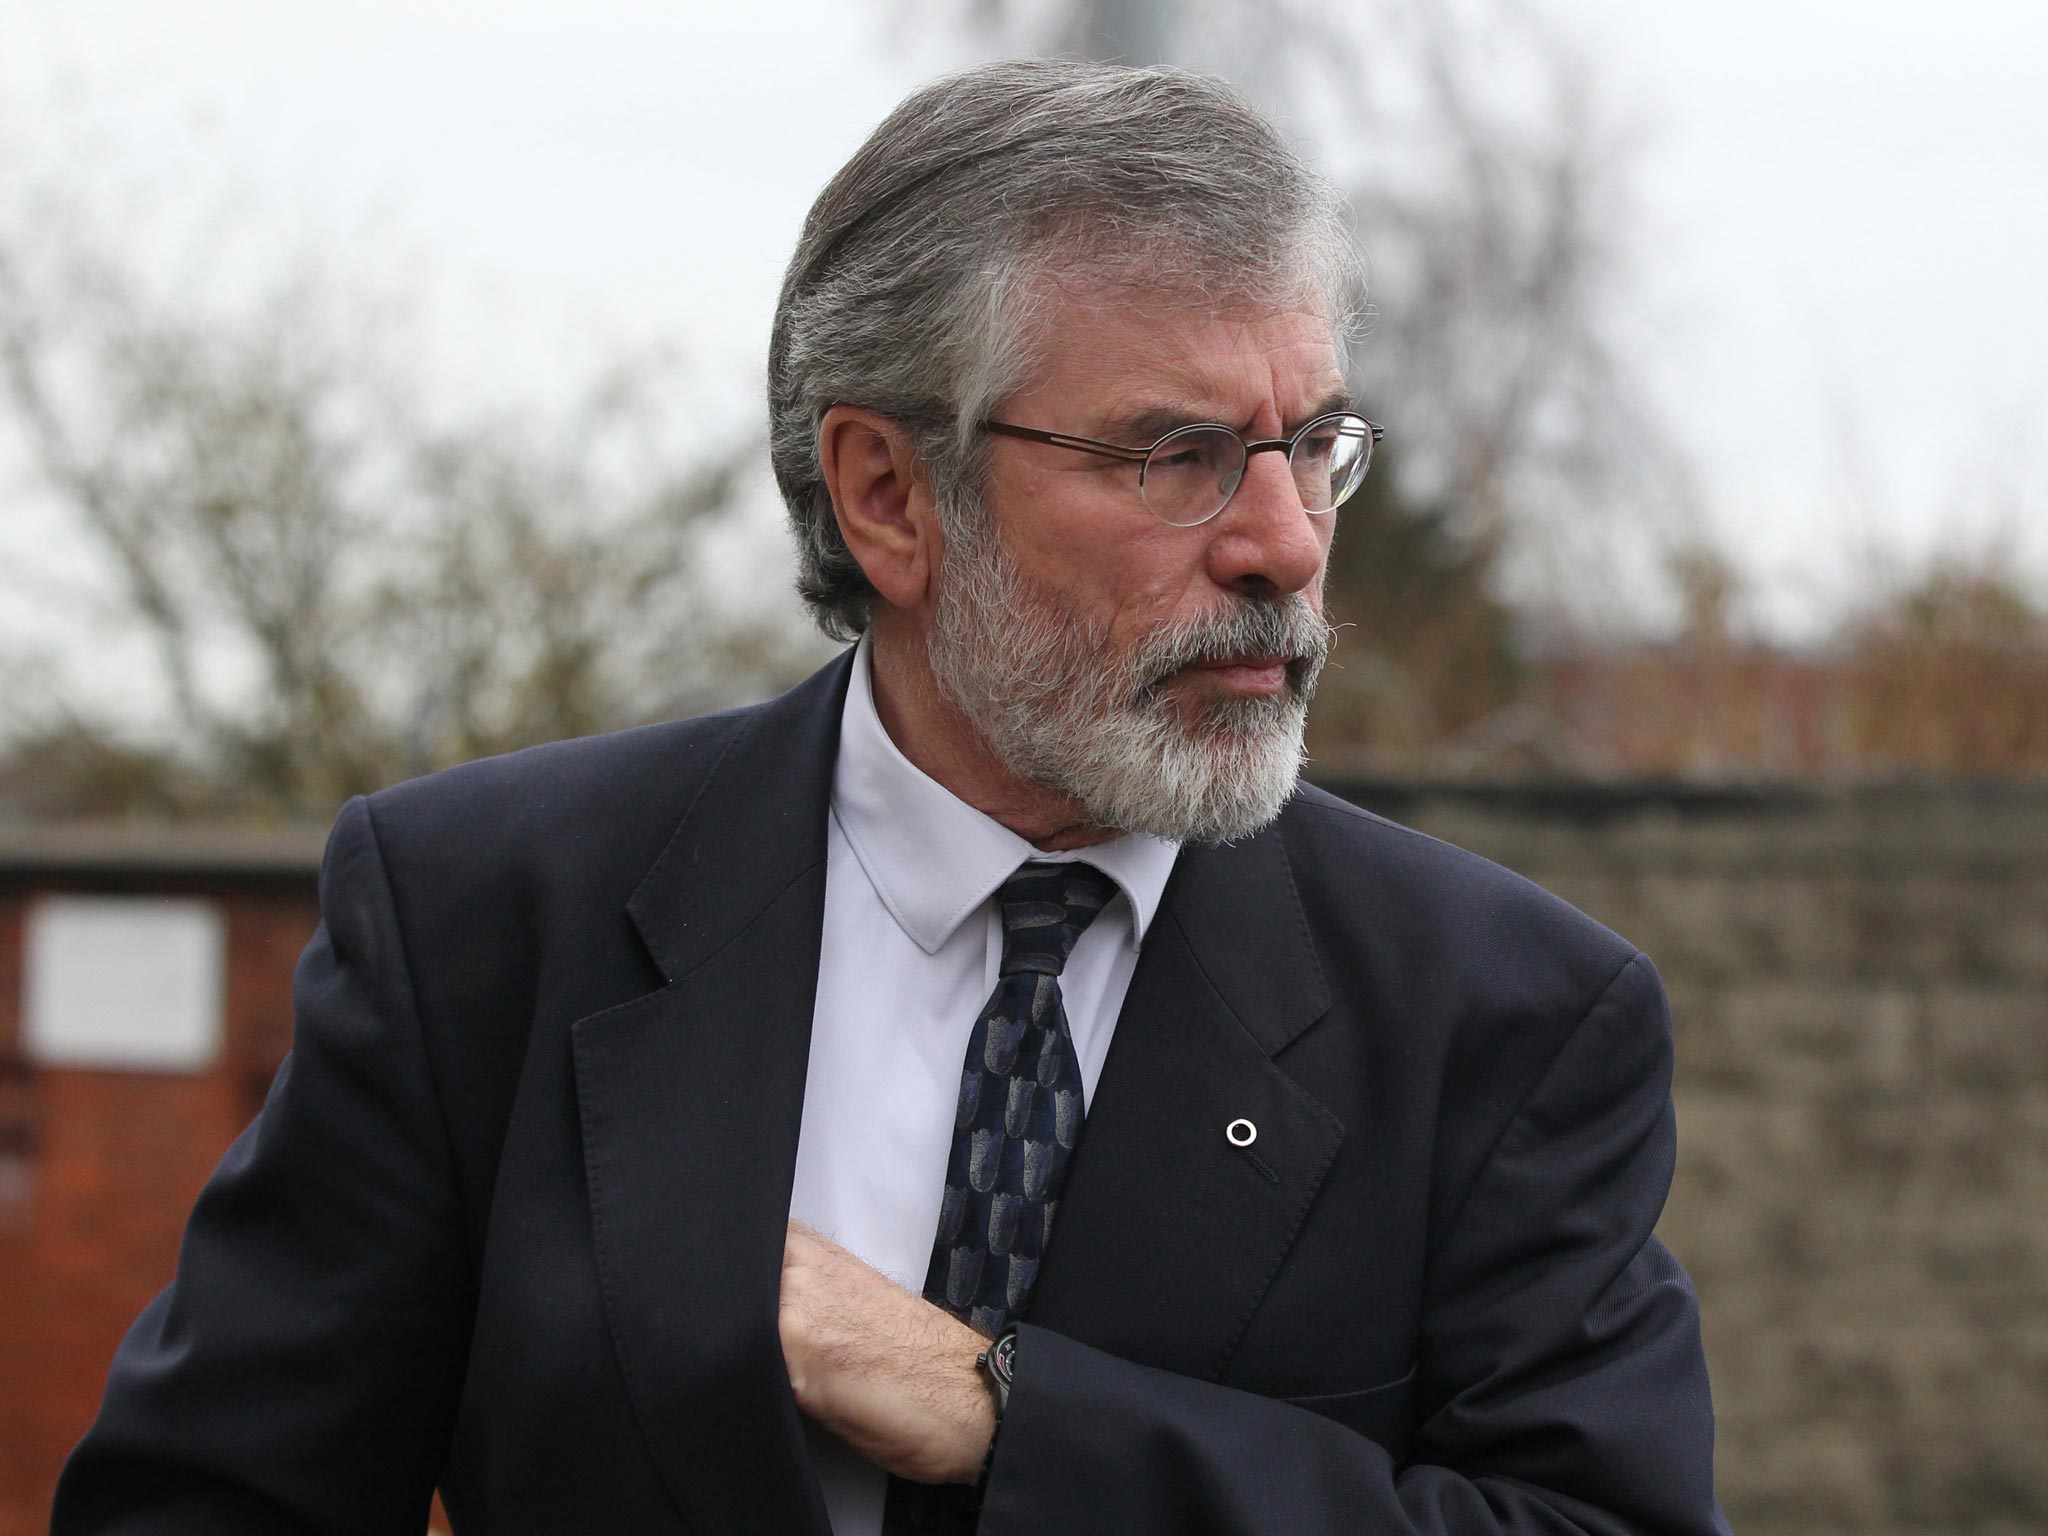 Sinn Fein President Gerry Adams, part of his stance was a refusal not to condemn or disavow the IRA